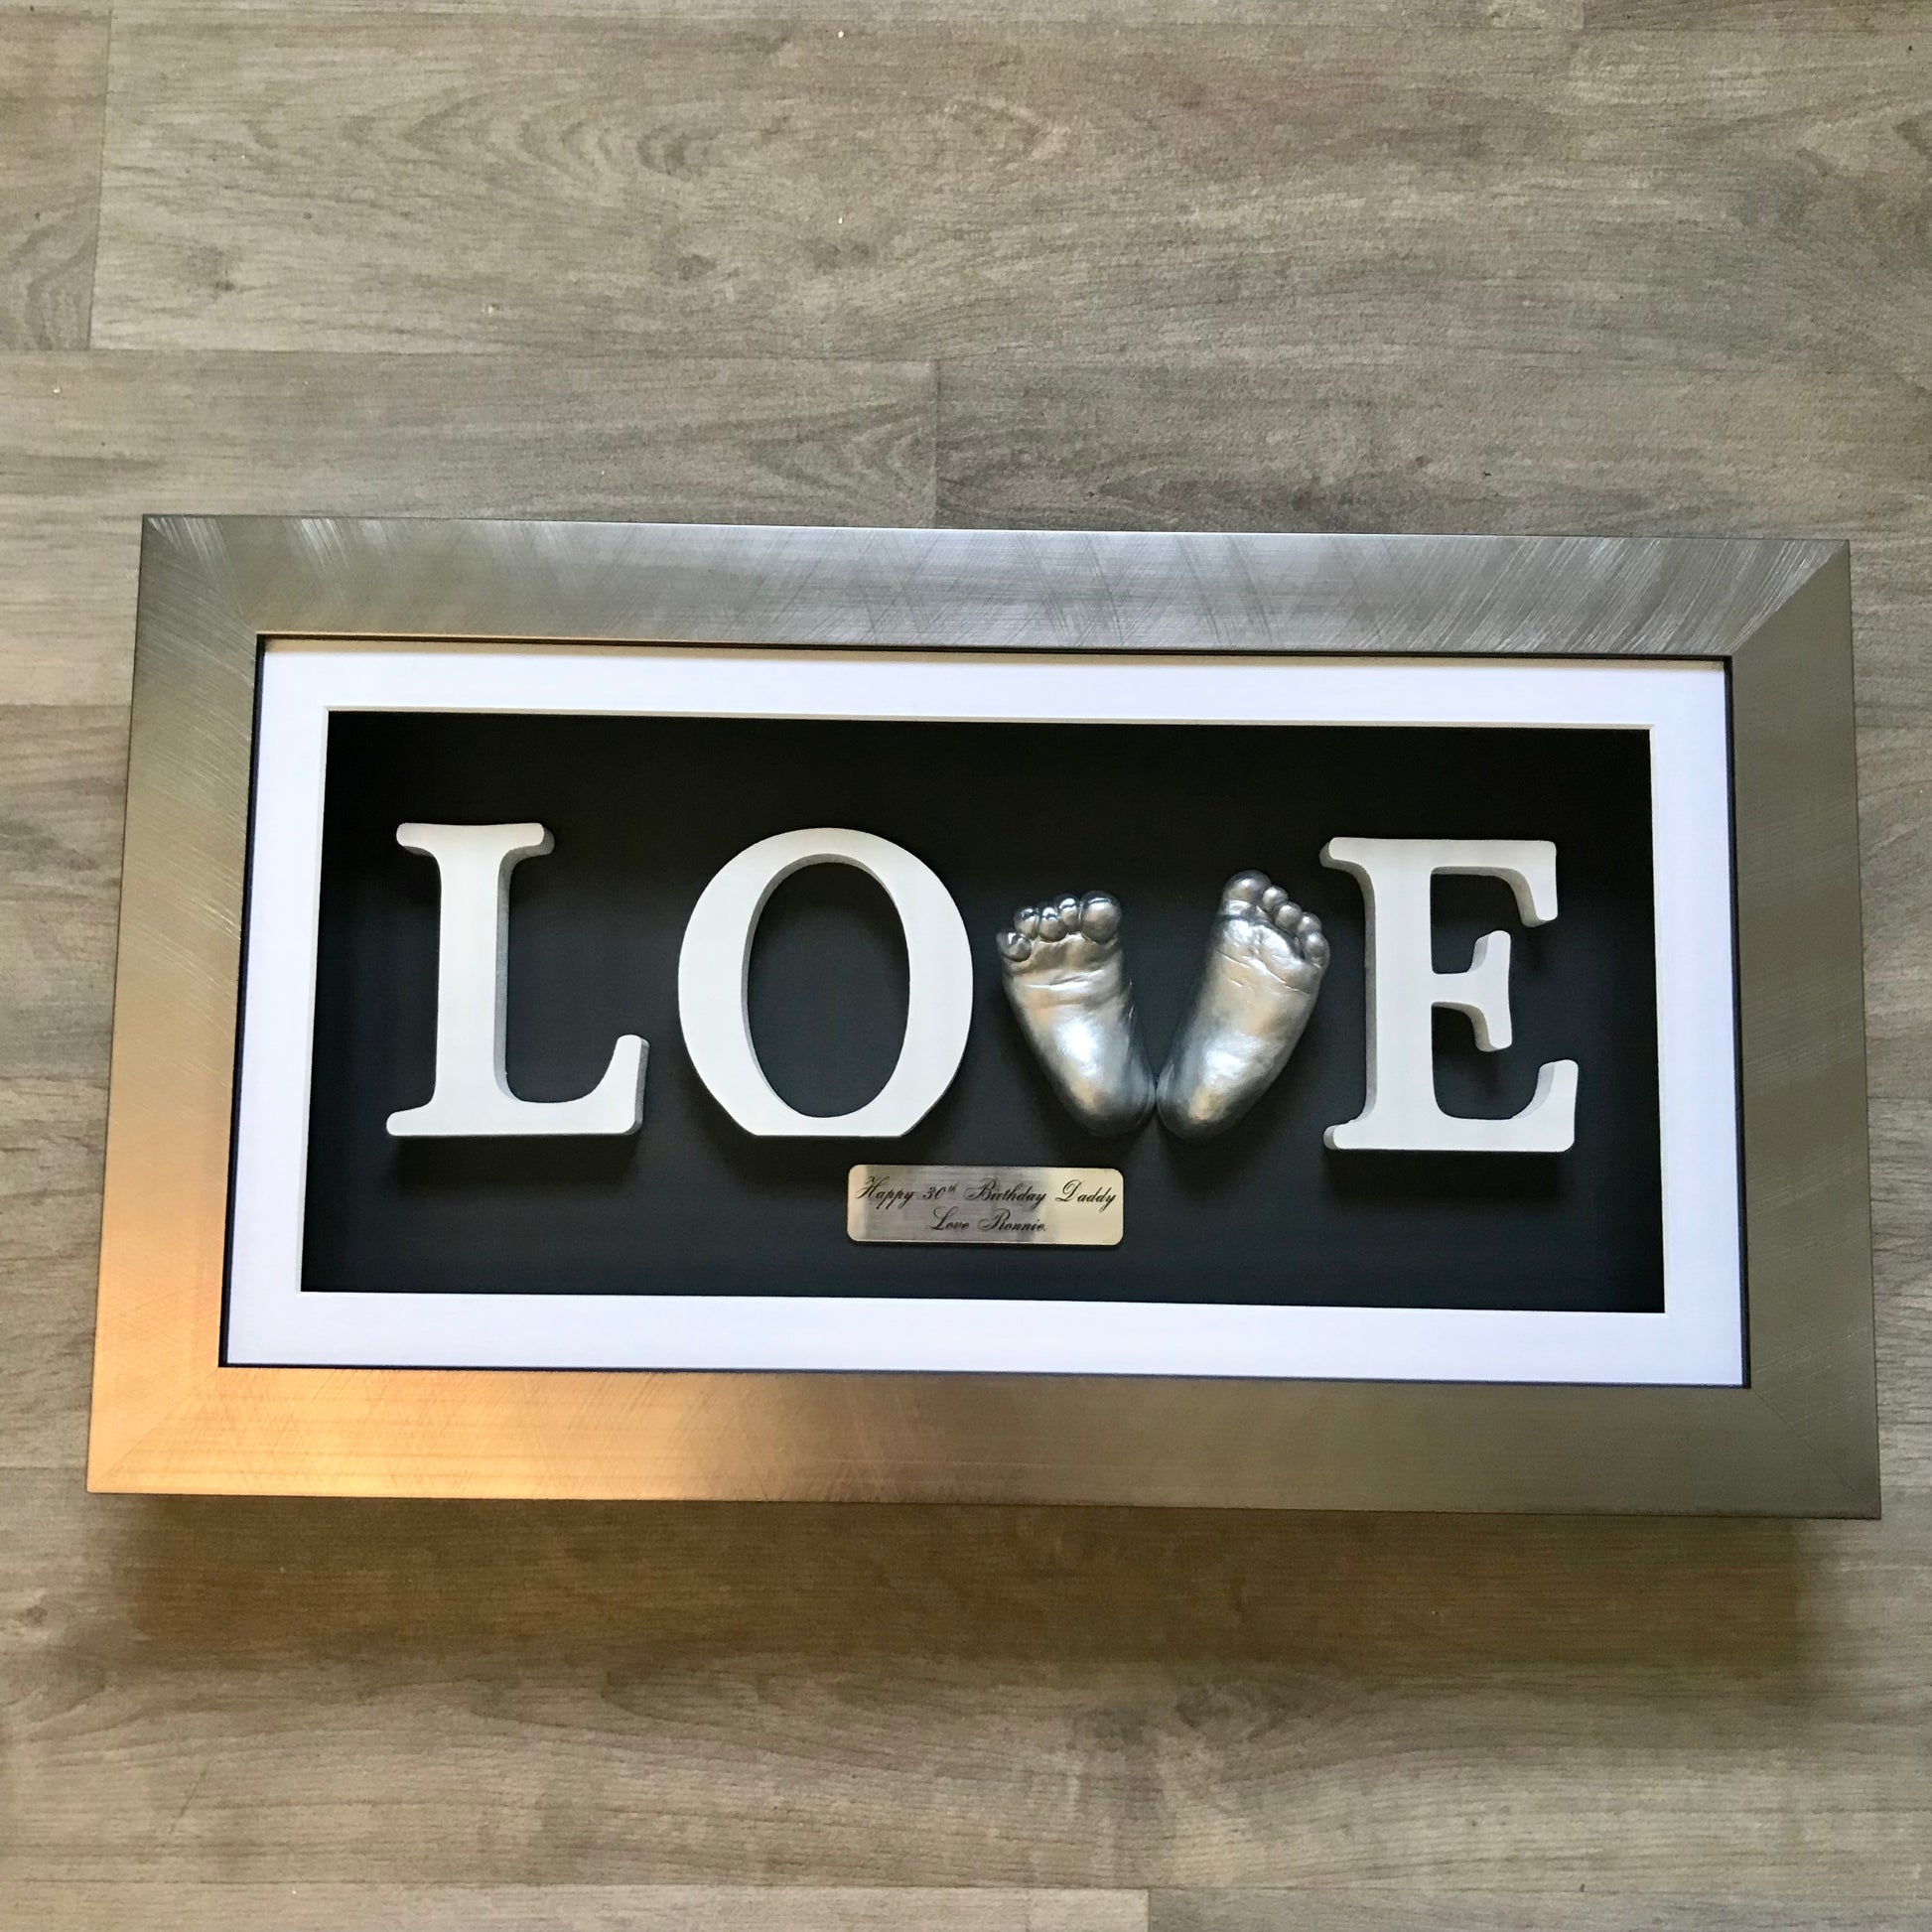 Products 3D Framed Casts With 'LOVE' Letters